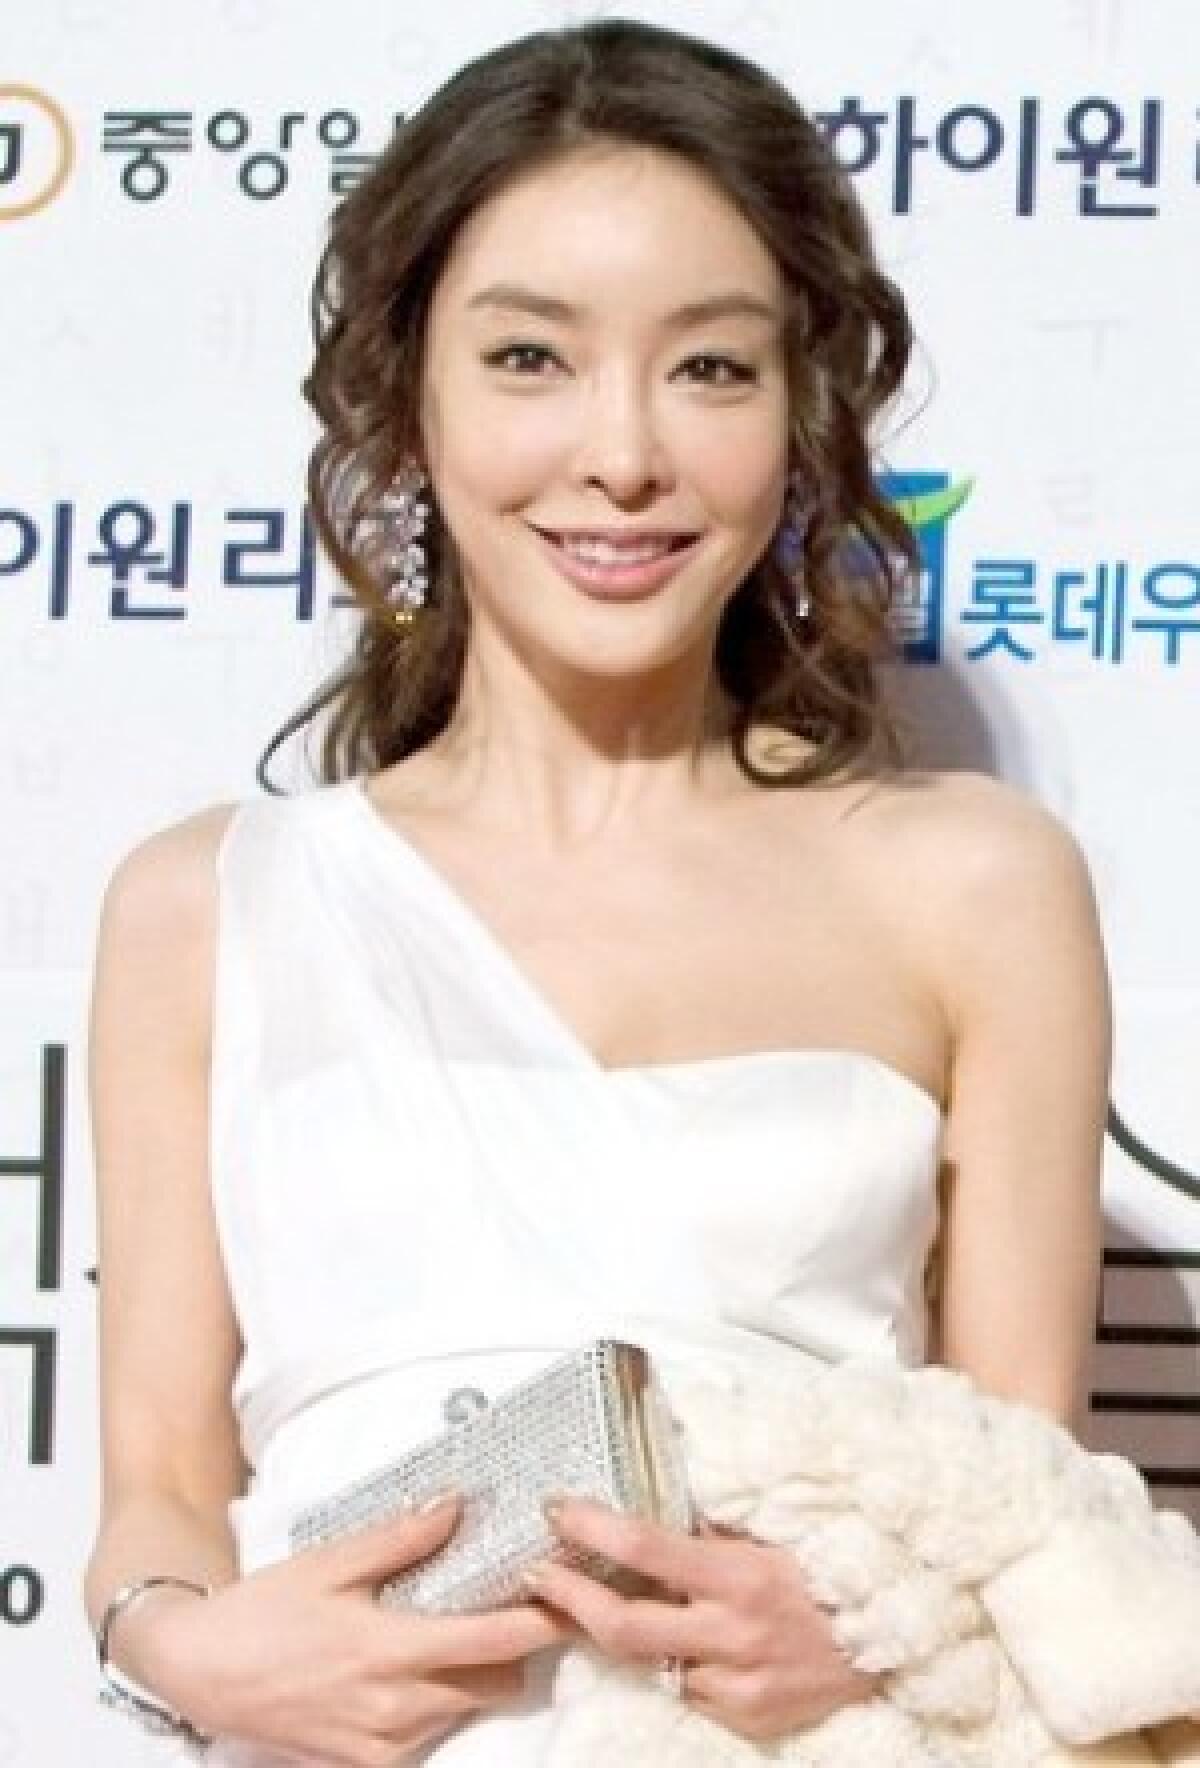 Jang Ja-yeon's purported suicide note tells of the South Korean actress being forced to have sex with TV executives.